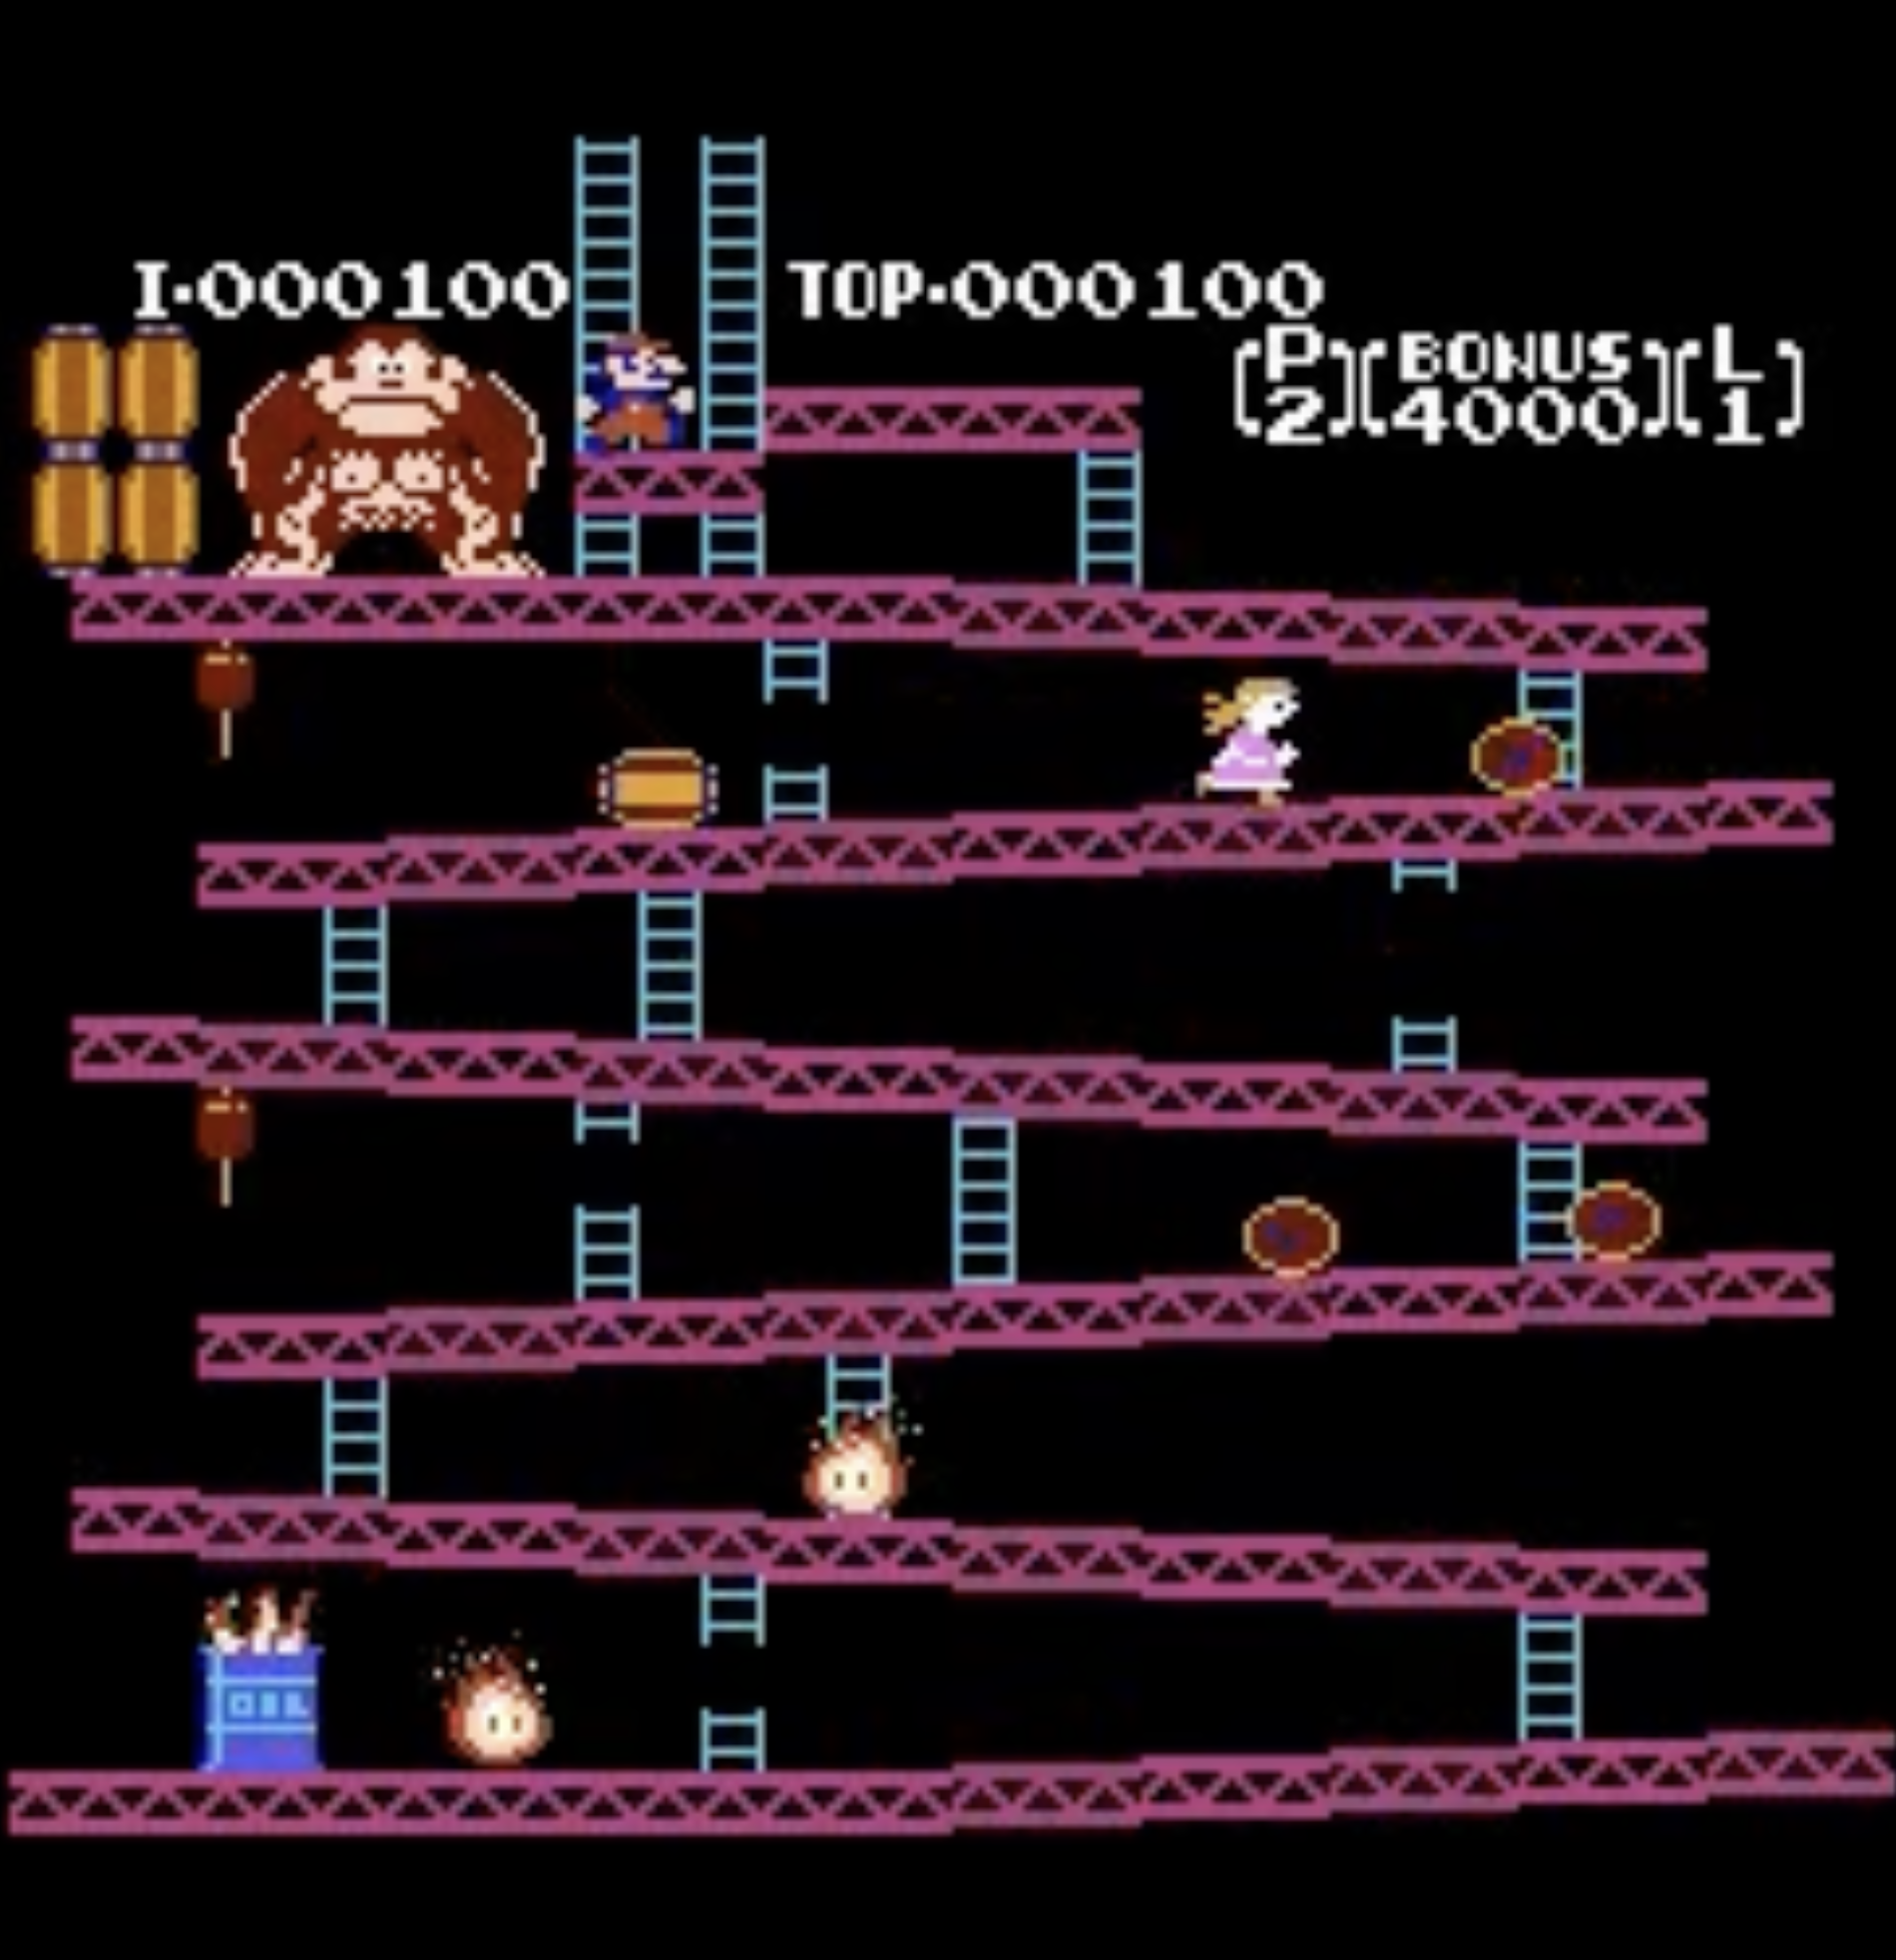 Screen capture of Donkey Kong with Mario and Pauline's roles reversed